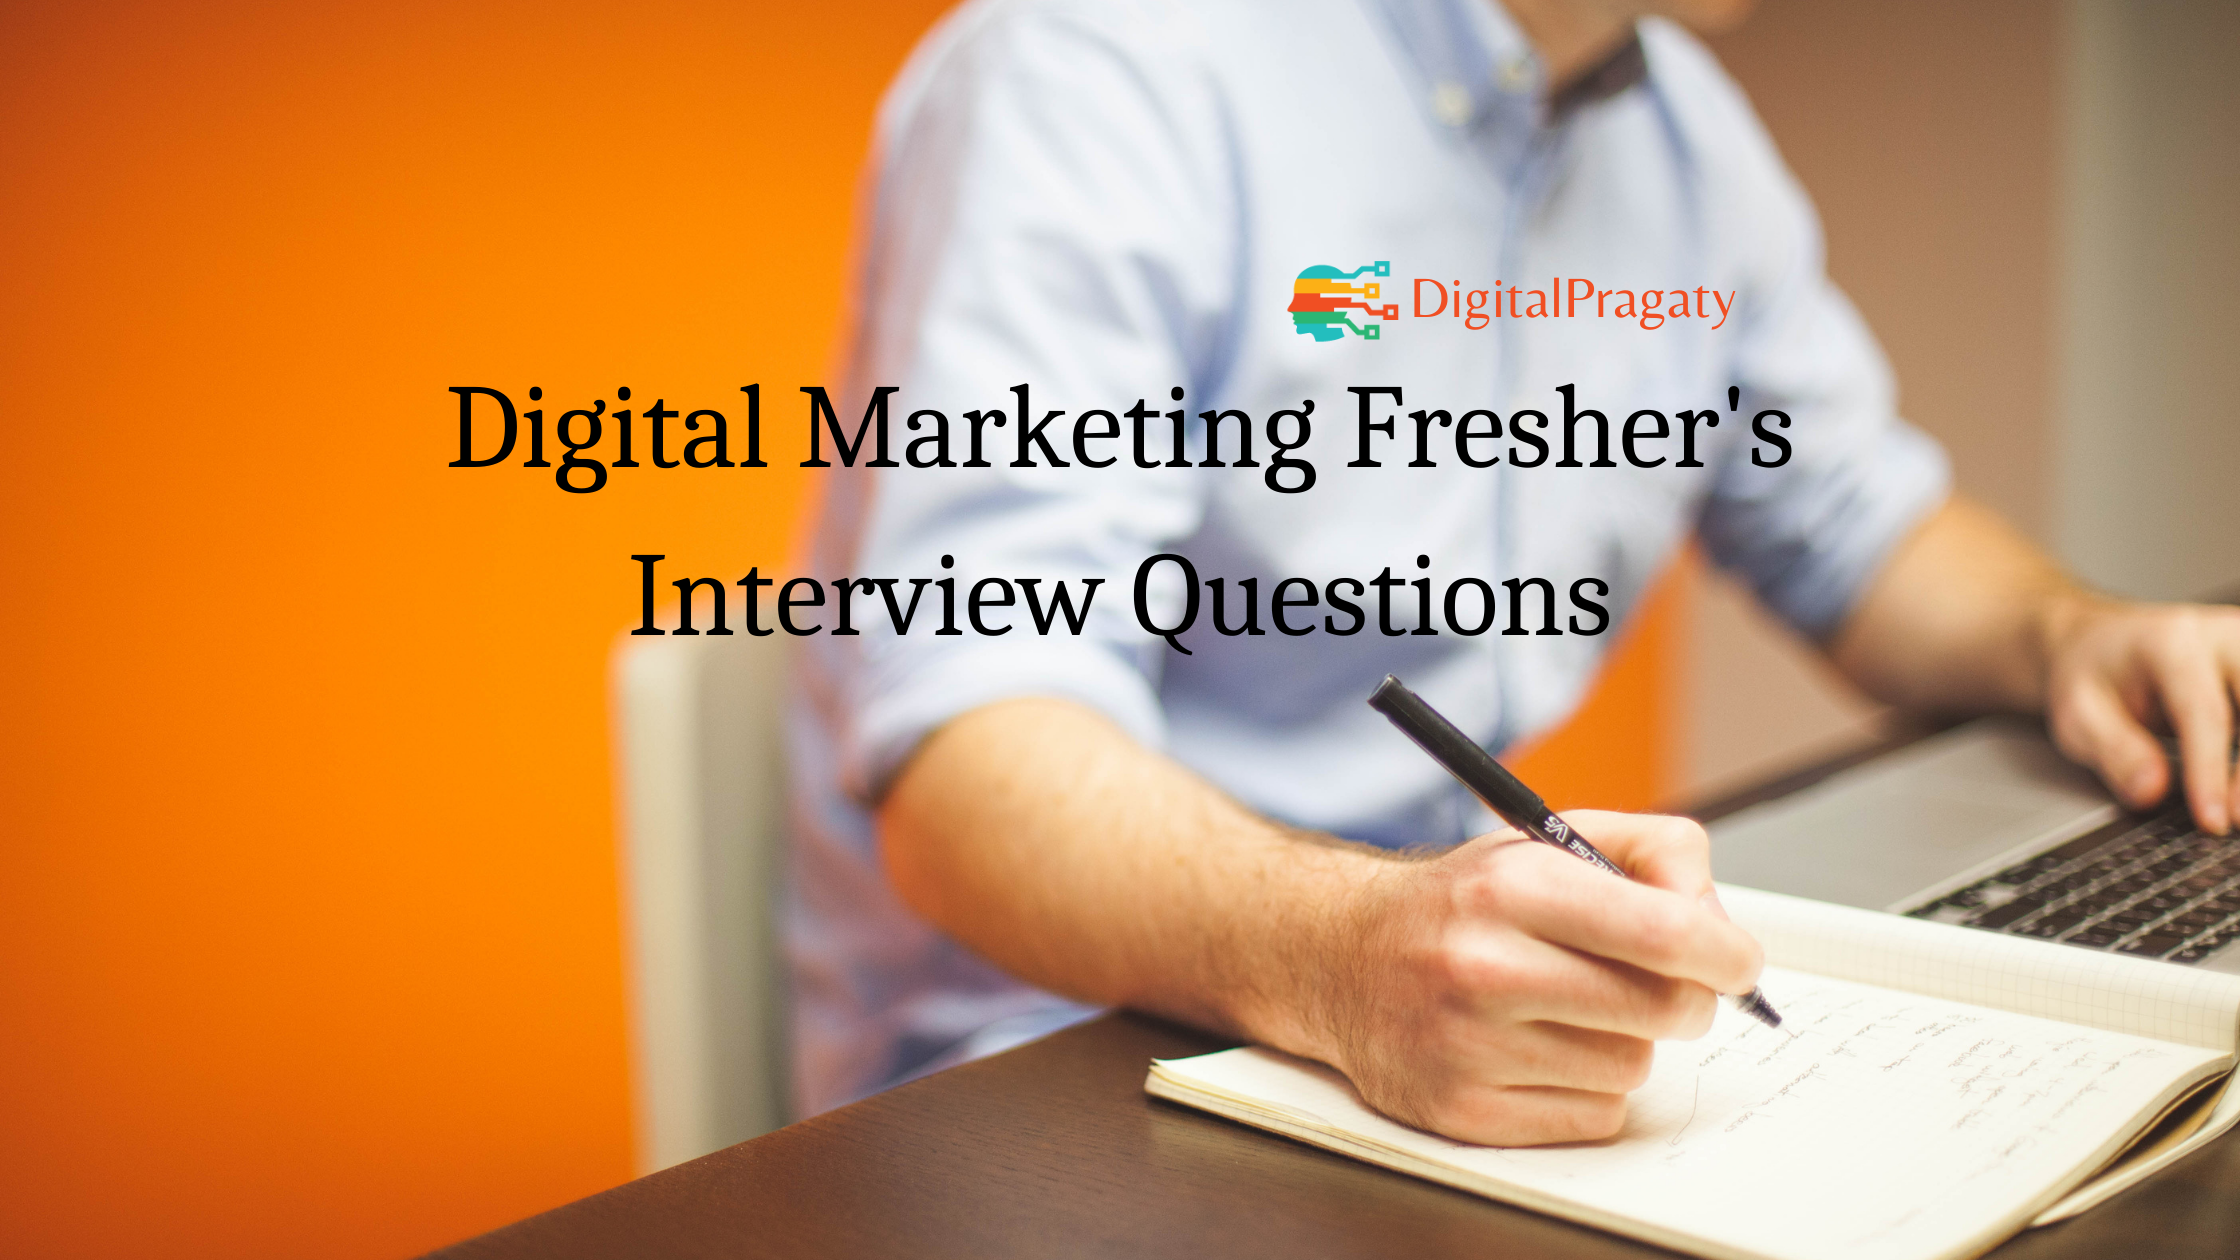 Digital Marketing Fresher’s Interview Questions